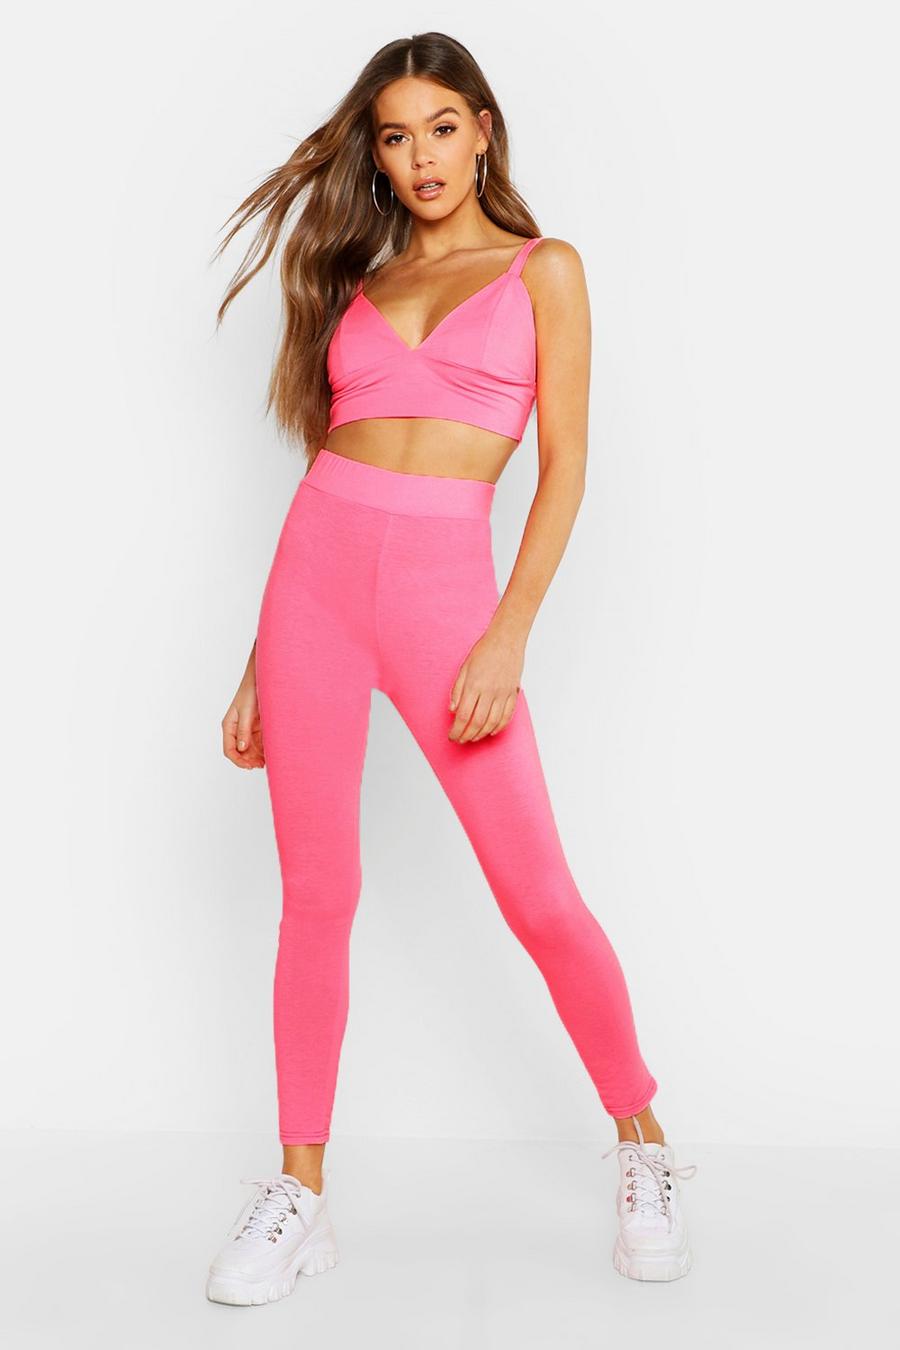 The Best Neon Workout Clothes